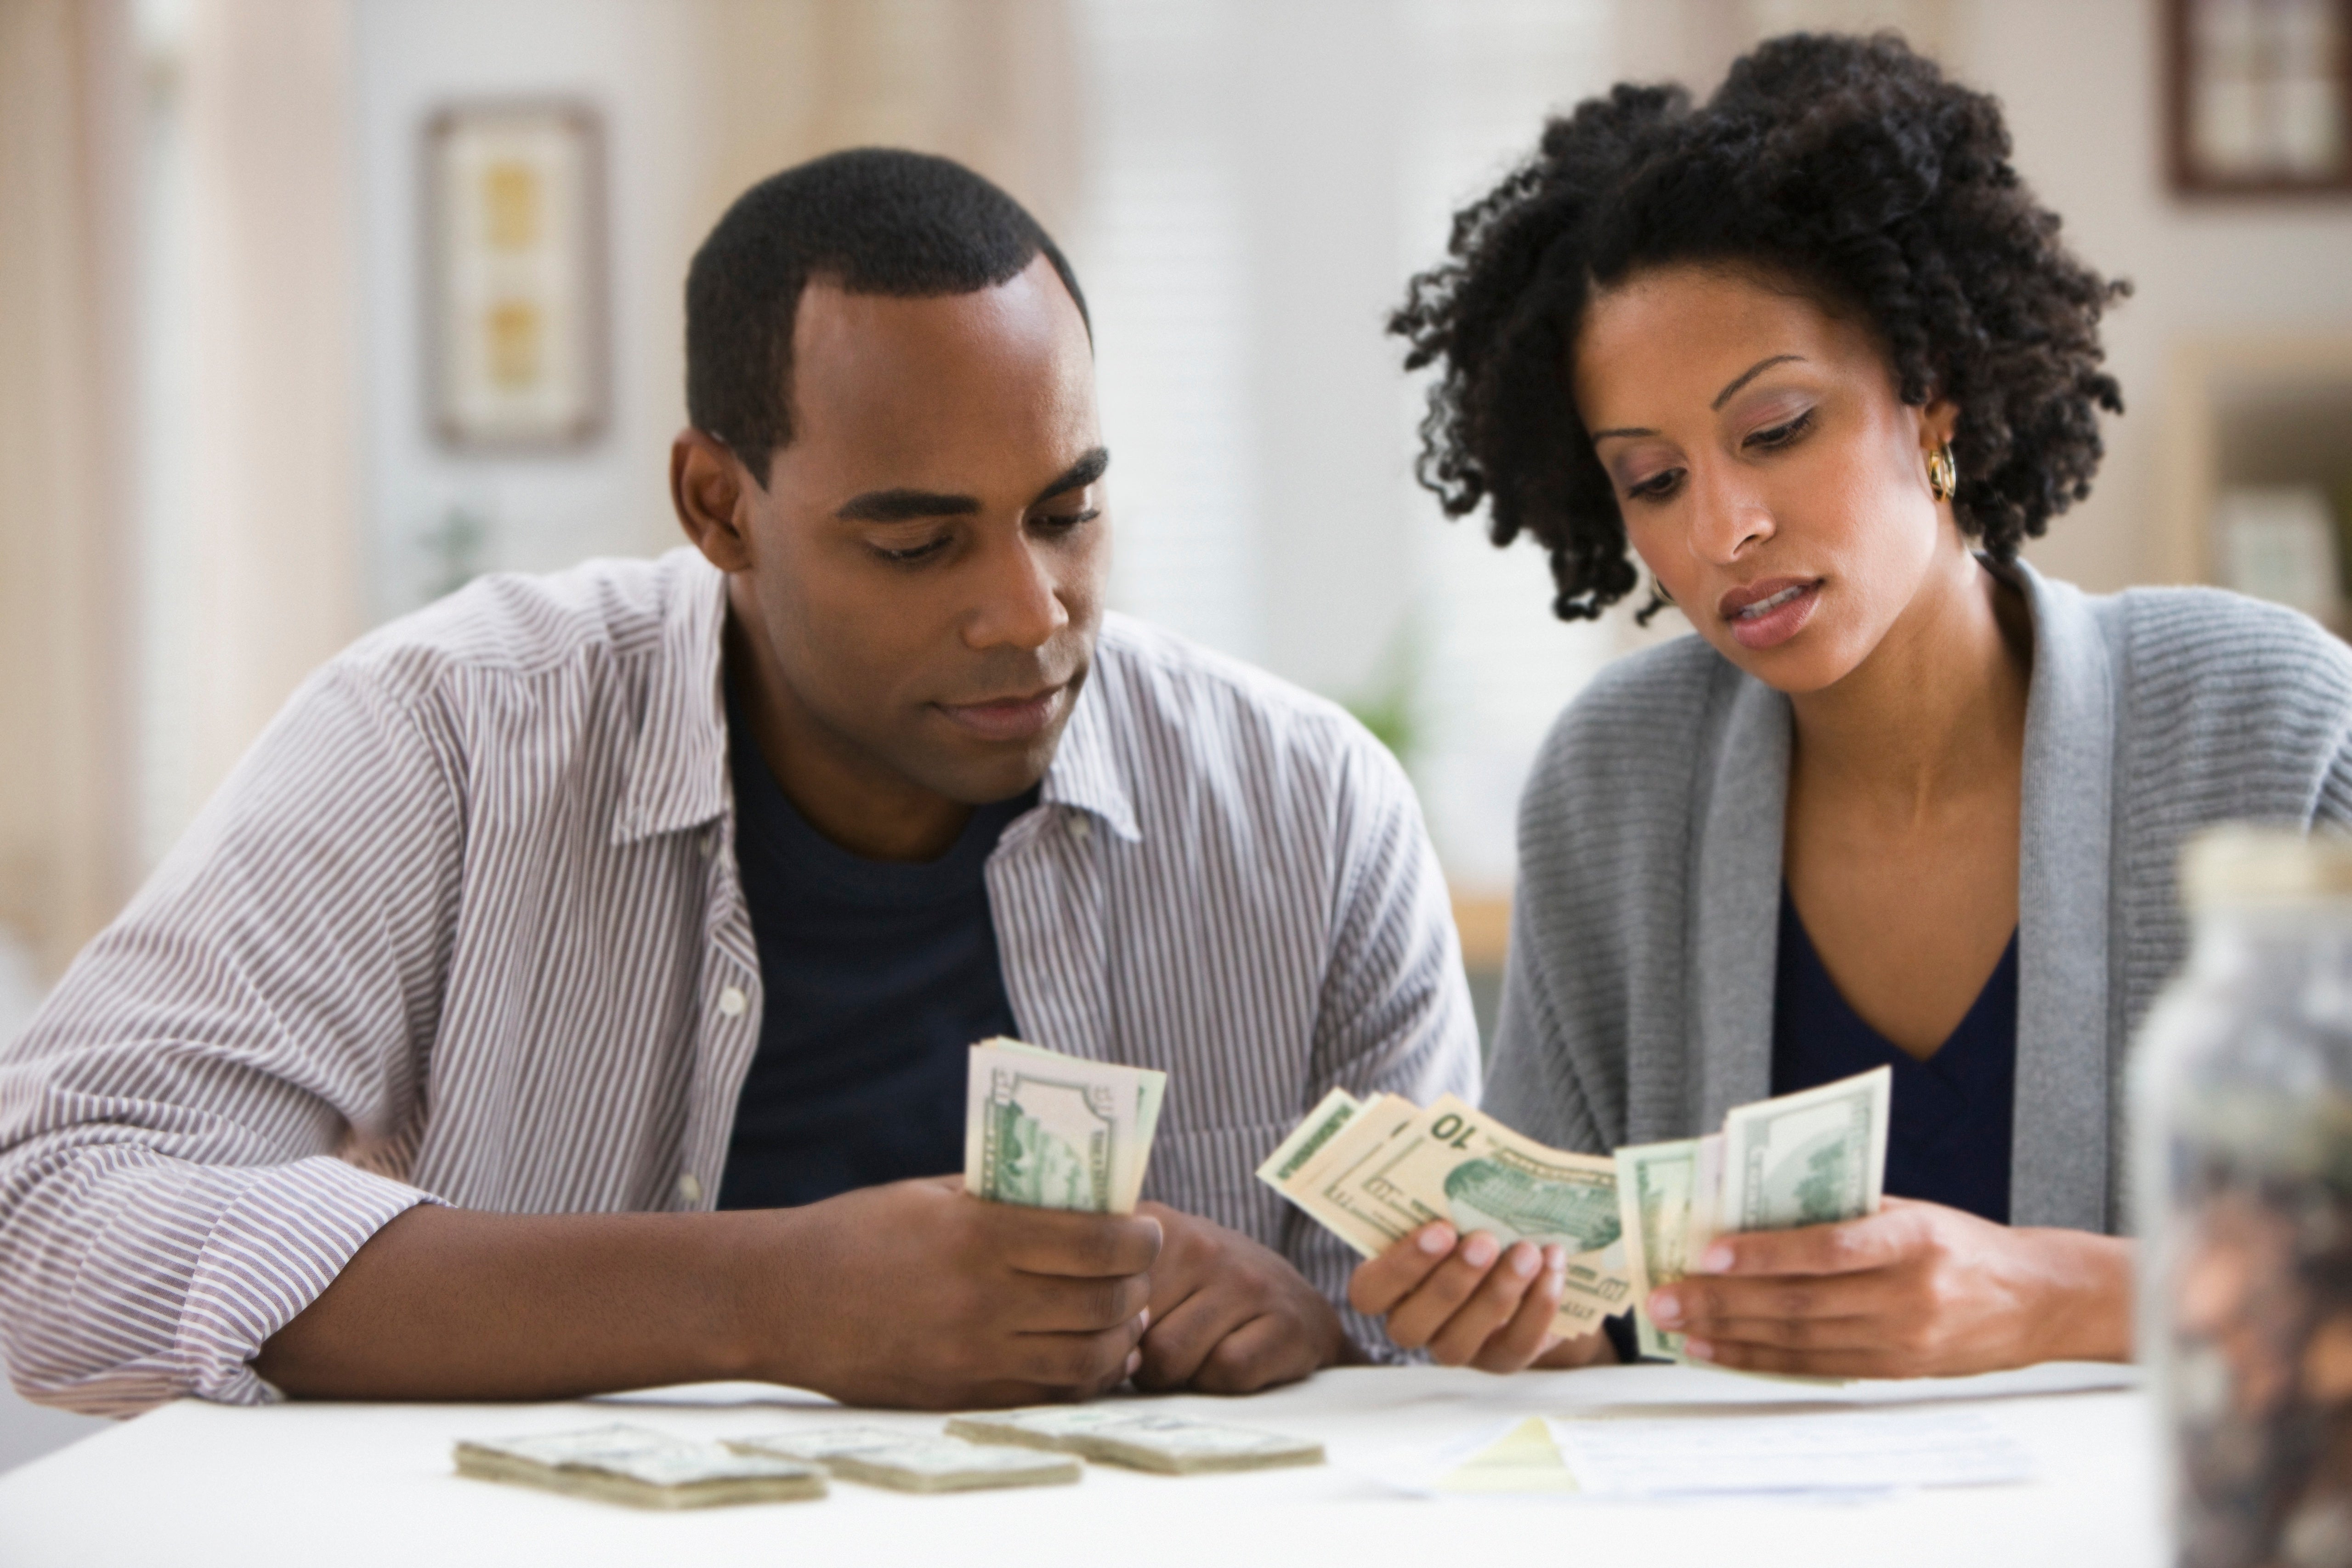 New Survey Says Women More Likely to Hide Spending Habits from Men